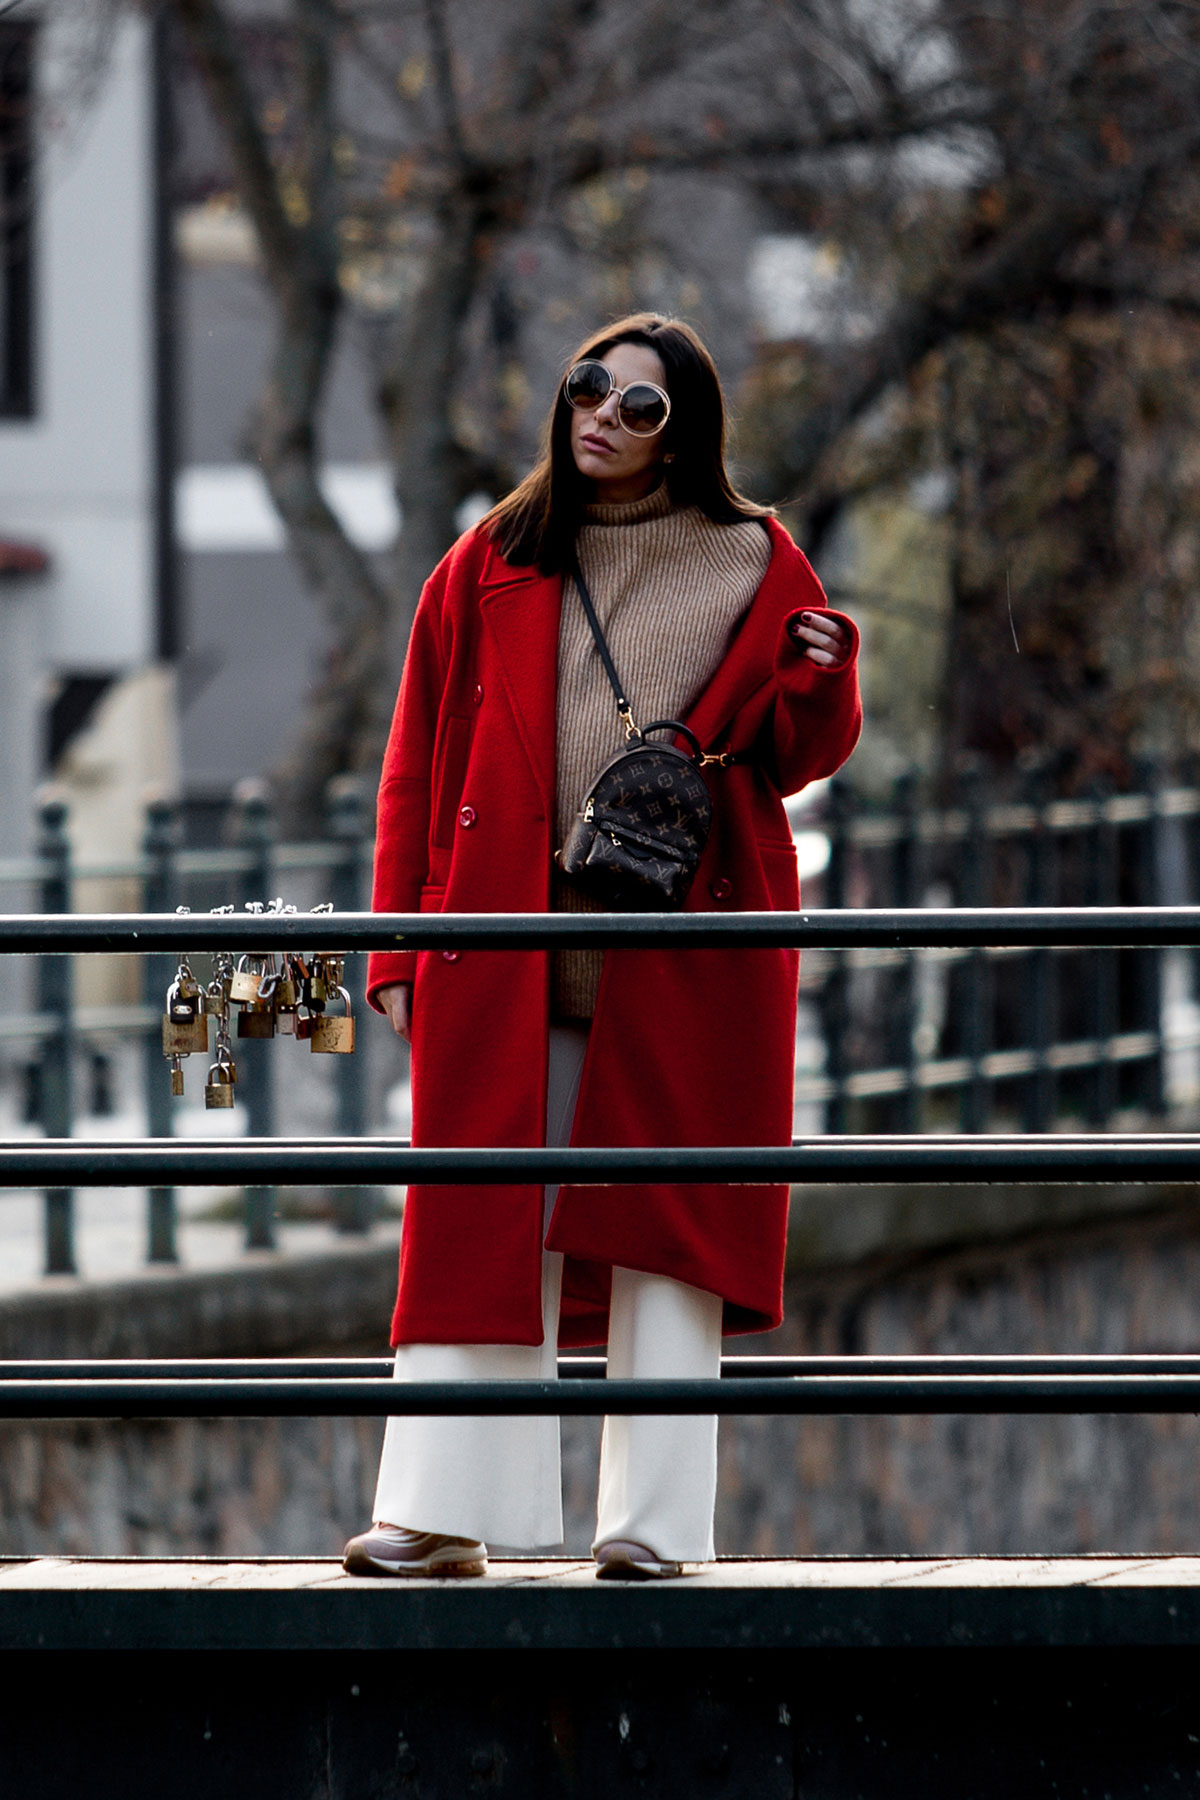 How To Wear A Red Coat - Stella Asteria wearing red coat with beige neutrals, pink Nike millennium sneakers, Louis Vuitton Palm Springs backpack and Chloe sunglasses